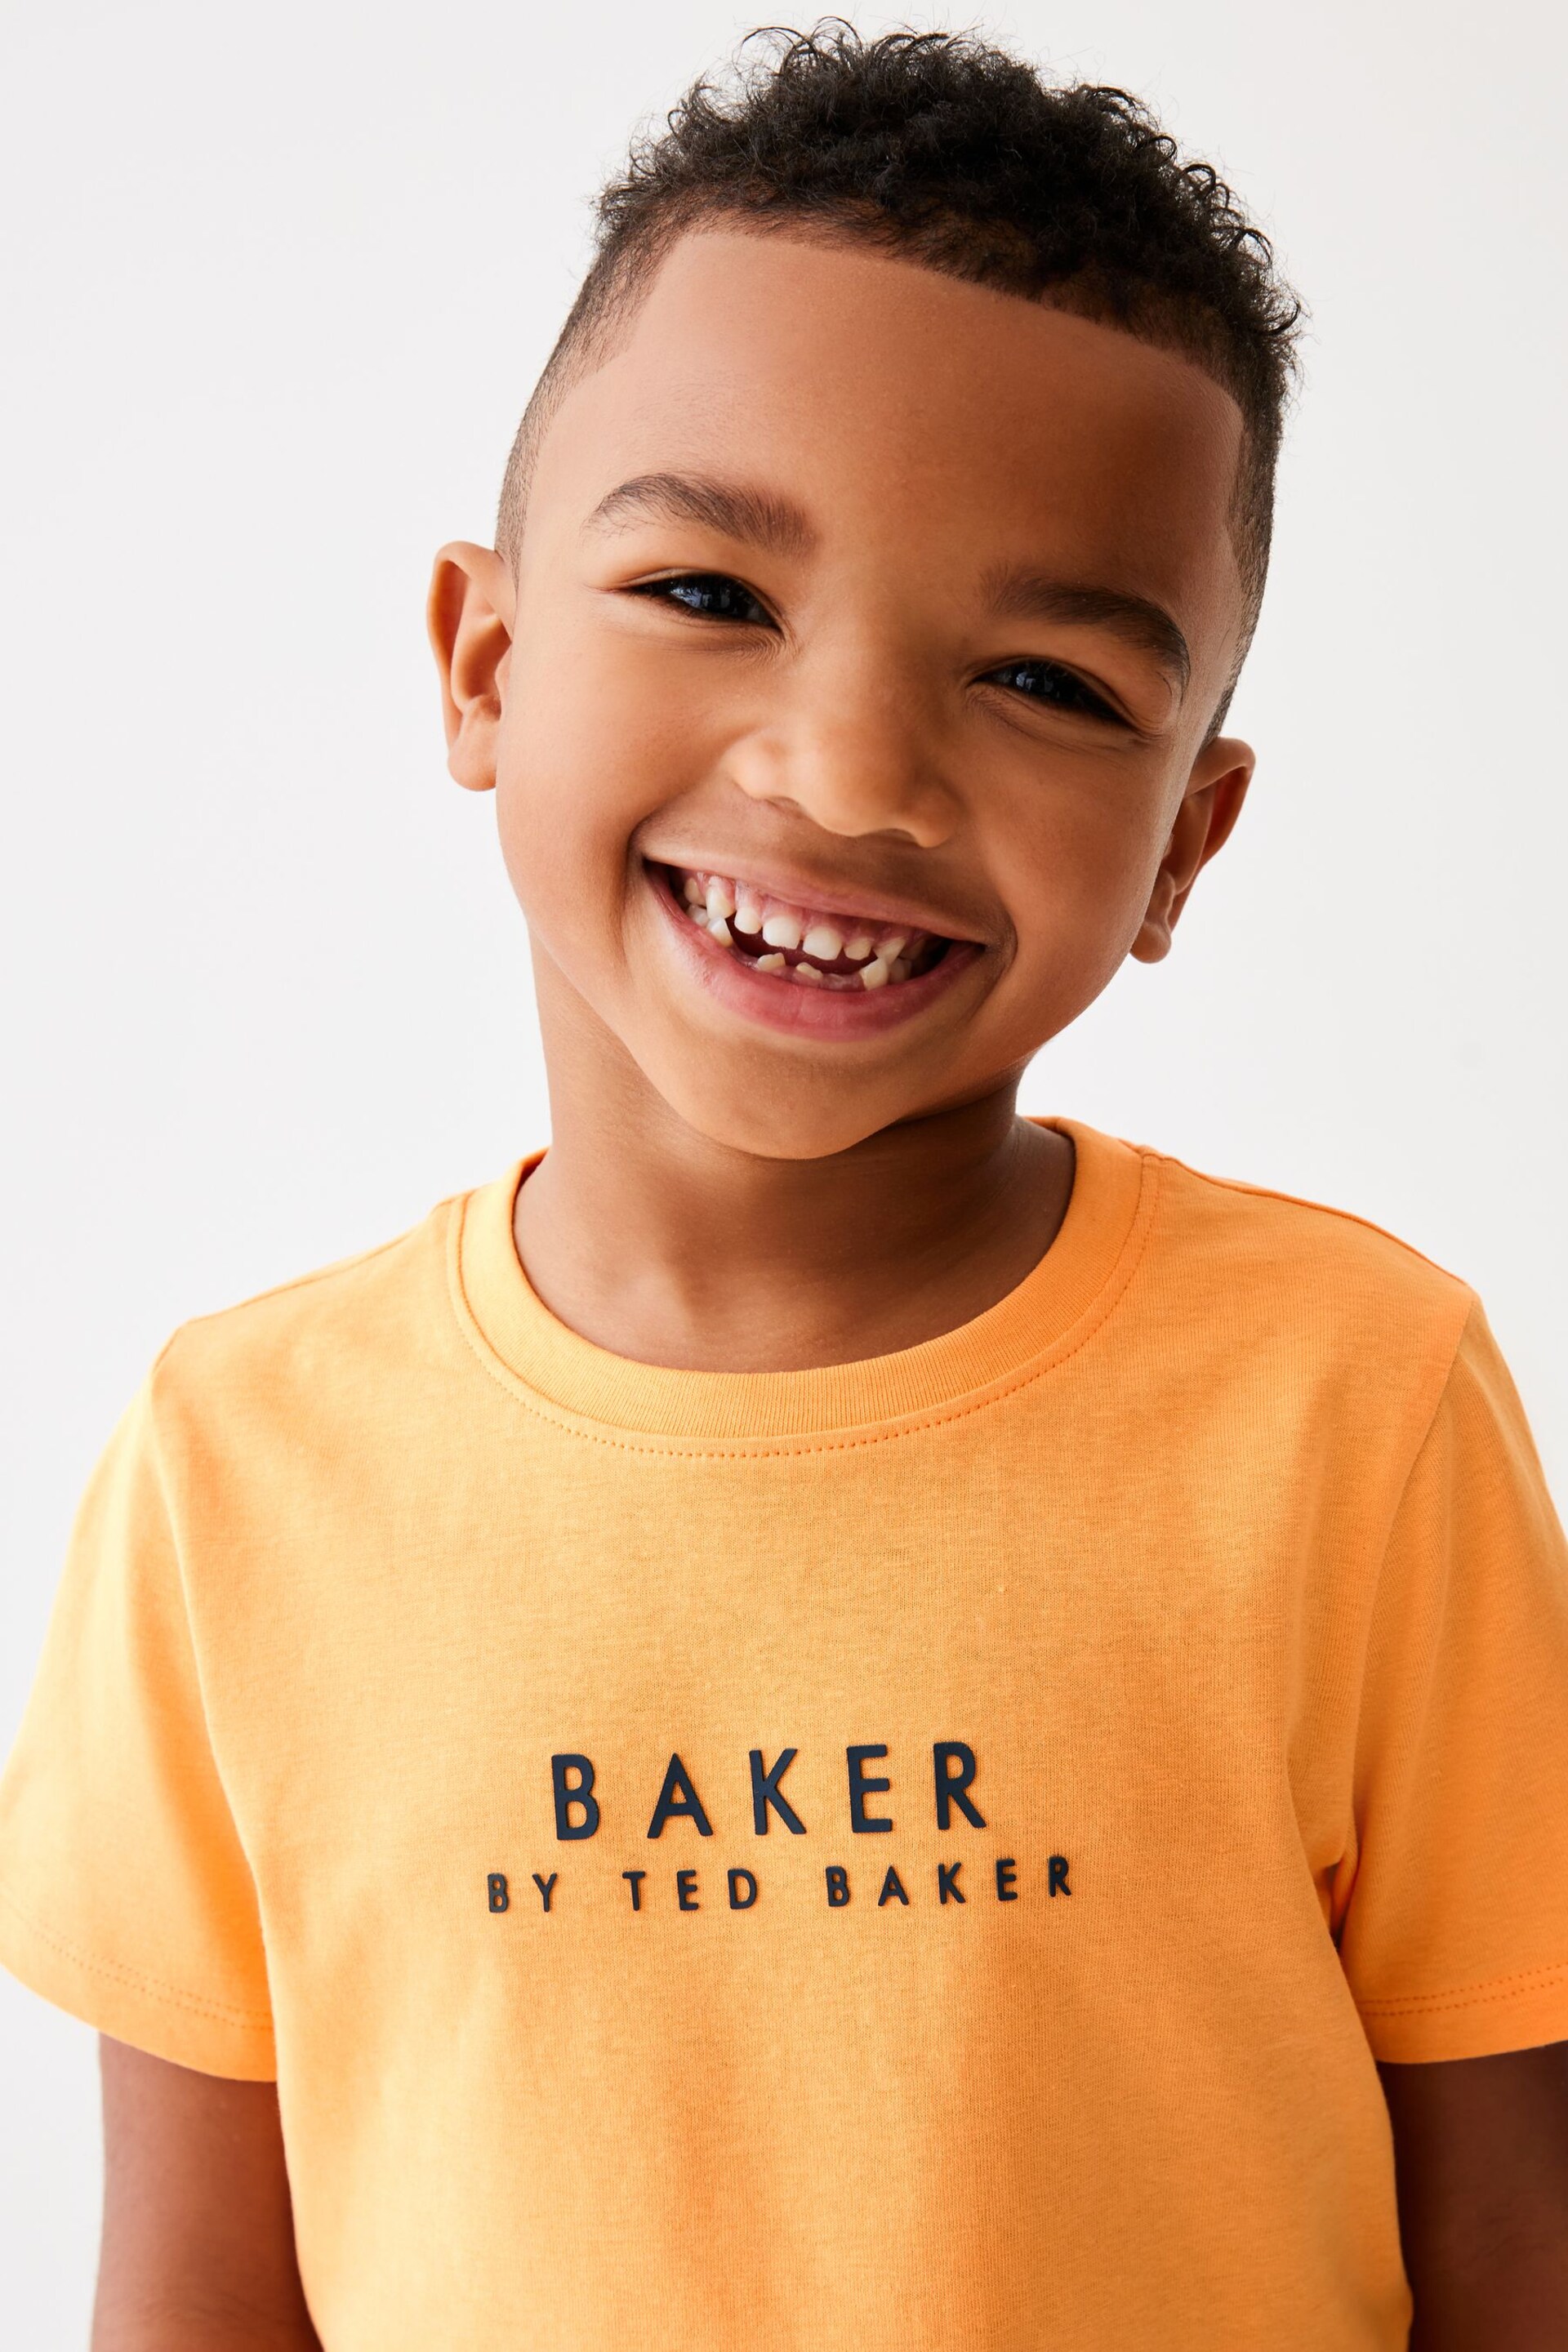 Baker by Ted Baker T-Shirt and Shorts Set - Image 4 of 13